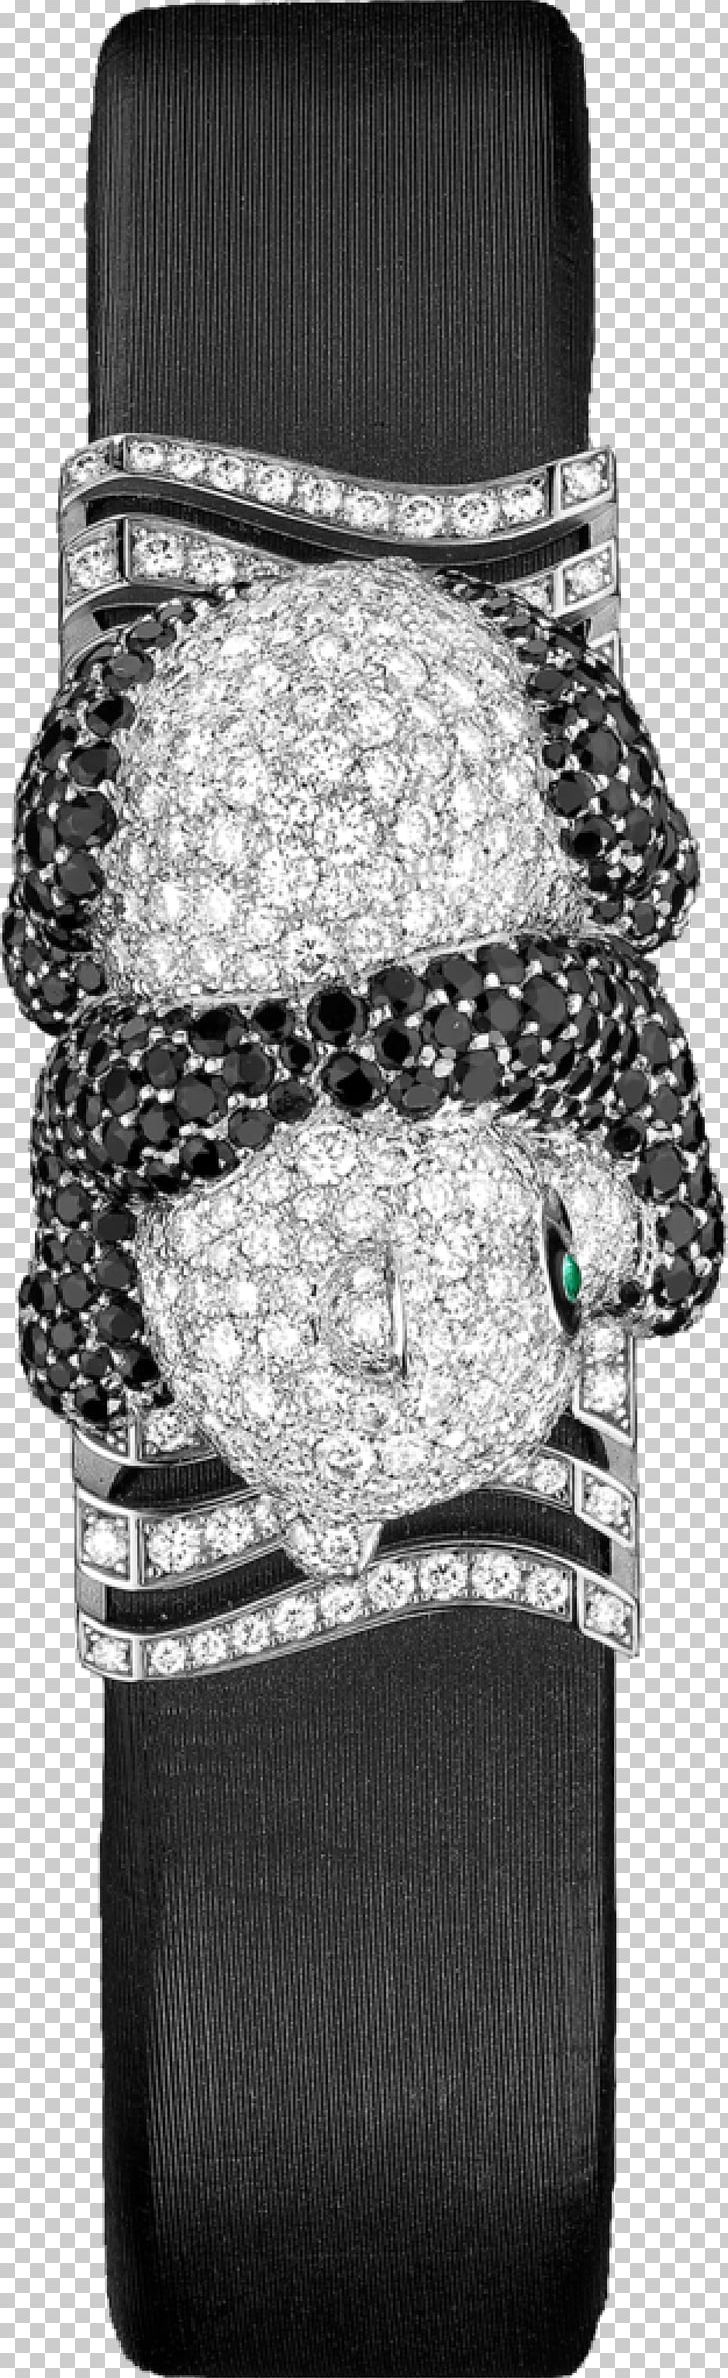 Giant Panda Cartier Jewellery Pocket Watch PNG, Clipart, Bangle, Bear, Black, Black And White, Cartier Free PNG Download